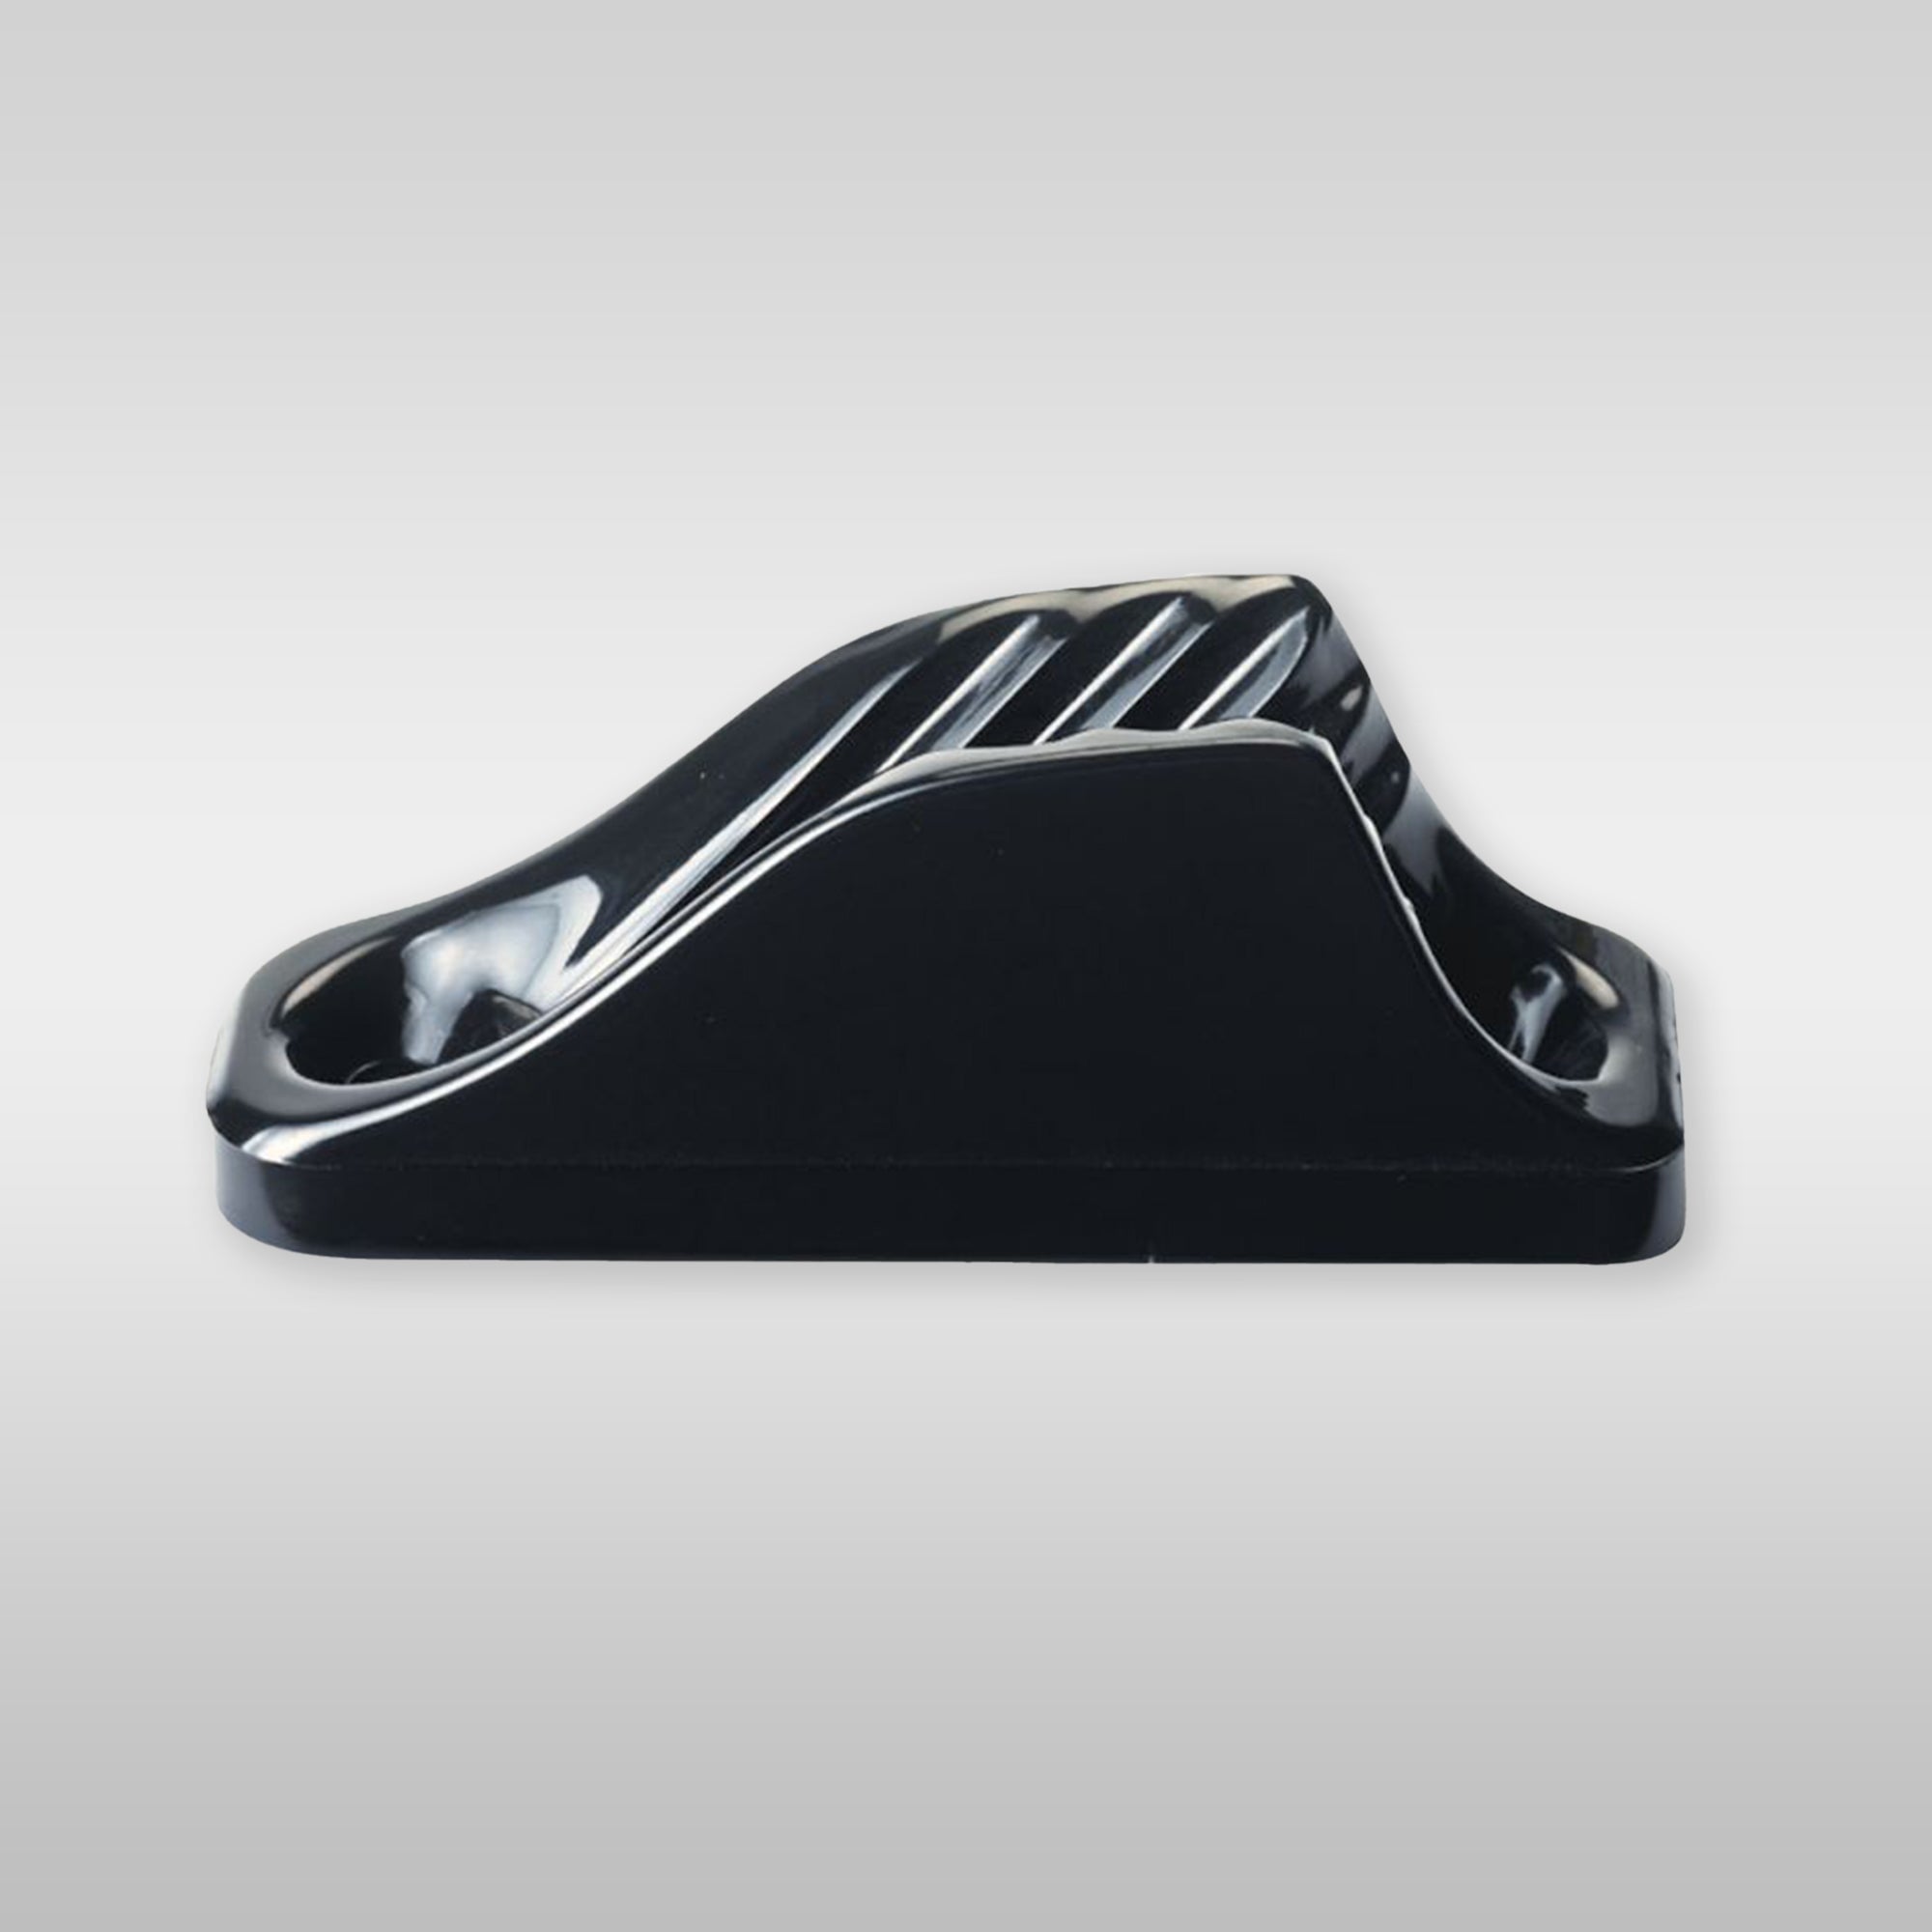 Windsurfshop windsurfwinkel windsurf-shop windsurf shop windsurfing shop windsurfing windsurfsegel Clamcleat Clamp